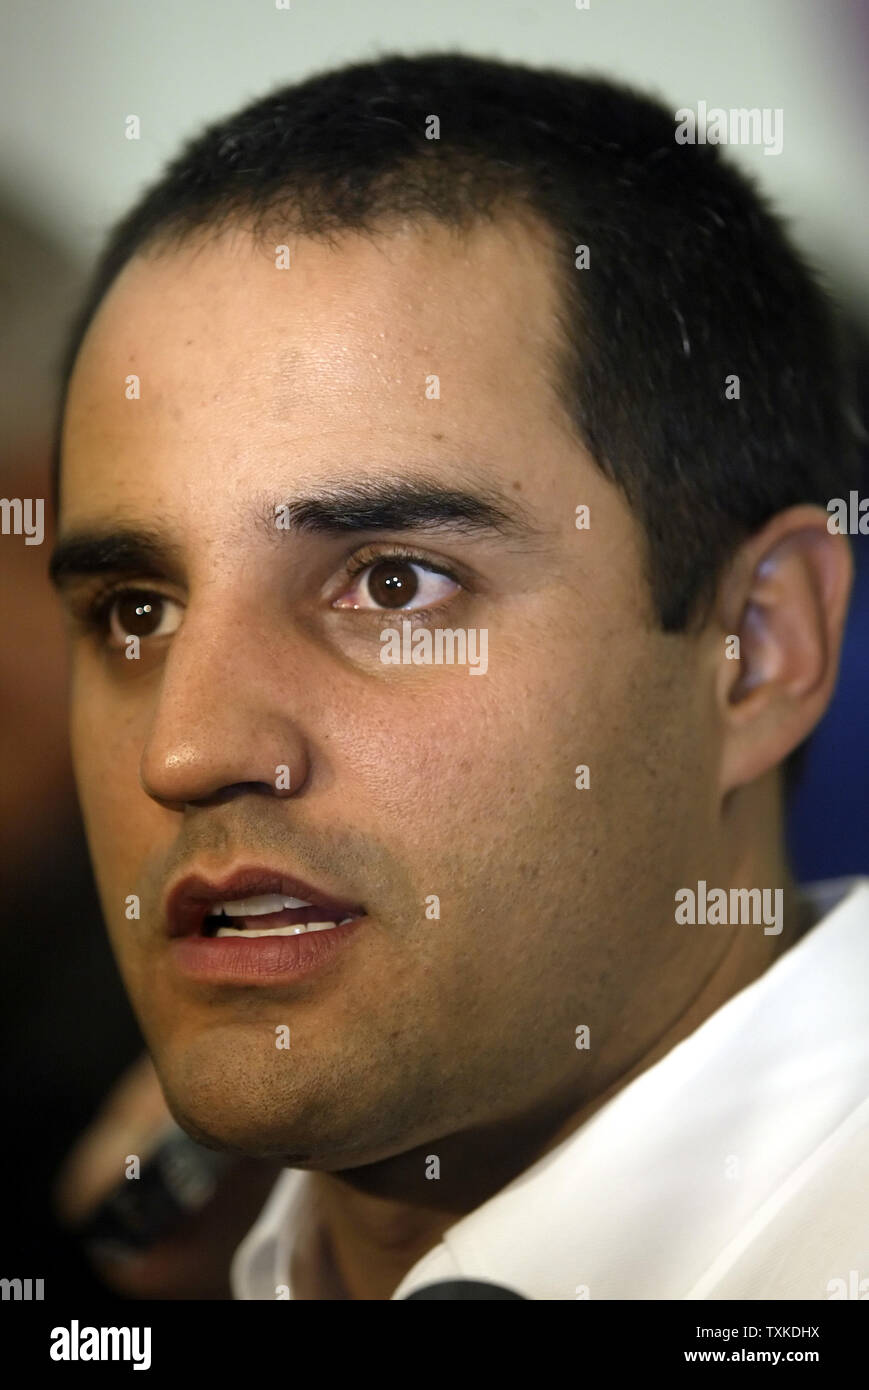 NASCAR driver Juan Pablo Montoya of Colombia answers questions during a press conference at Chip Ganassi Racing in Concord, NC on January 22, 2007 during the NASCAR NEXTEL Cup Media Tour. (UPI Photo/Nell Redmond) Stock Photo